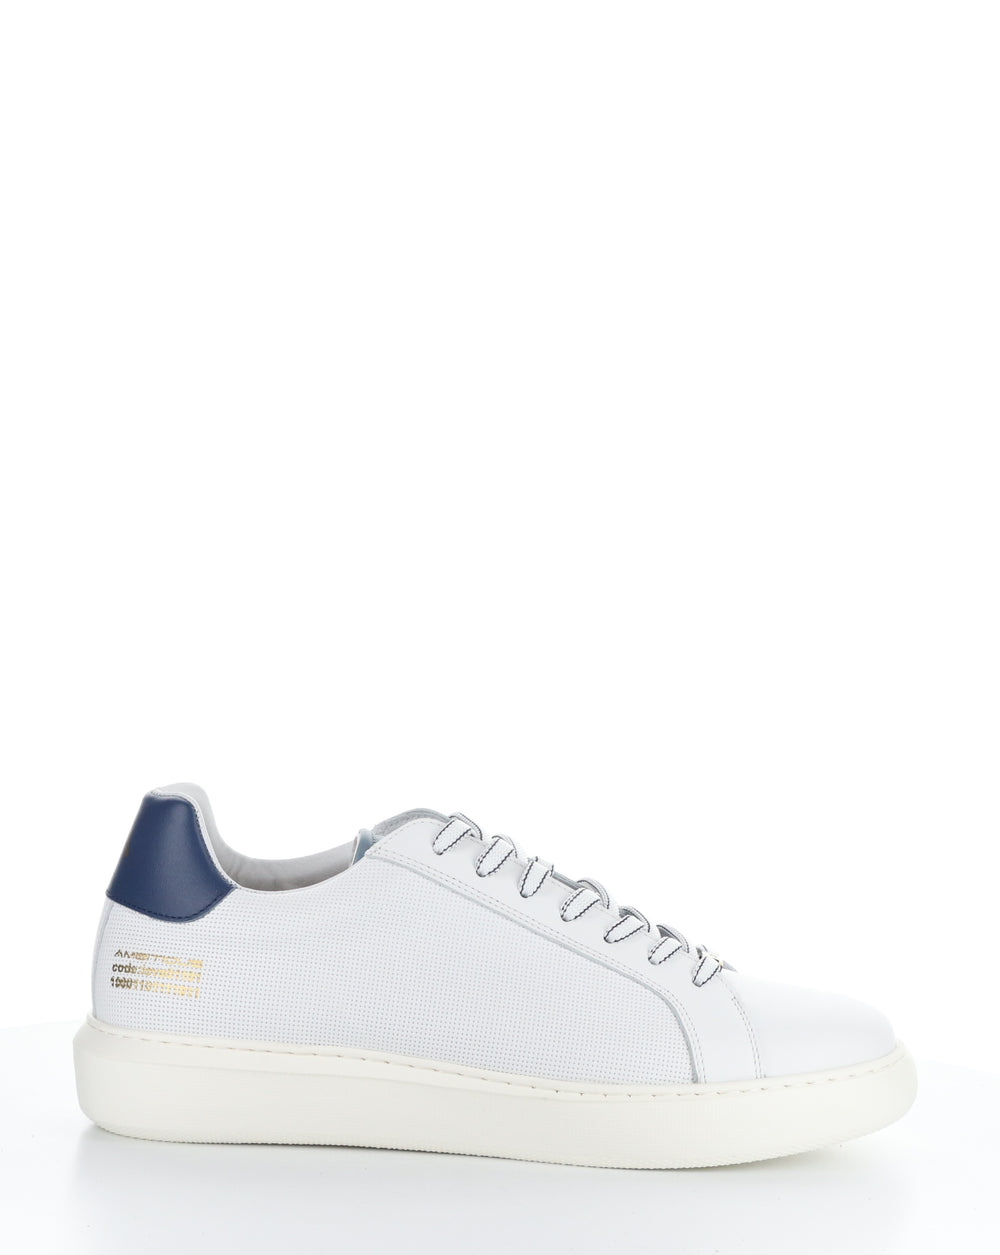 10634A OFF WHITE/BLUE/NAVY Lace-up Shoes